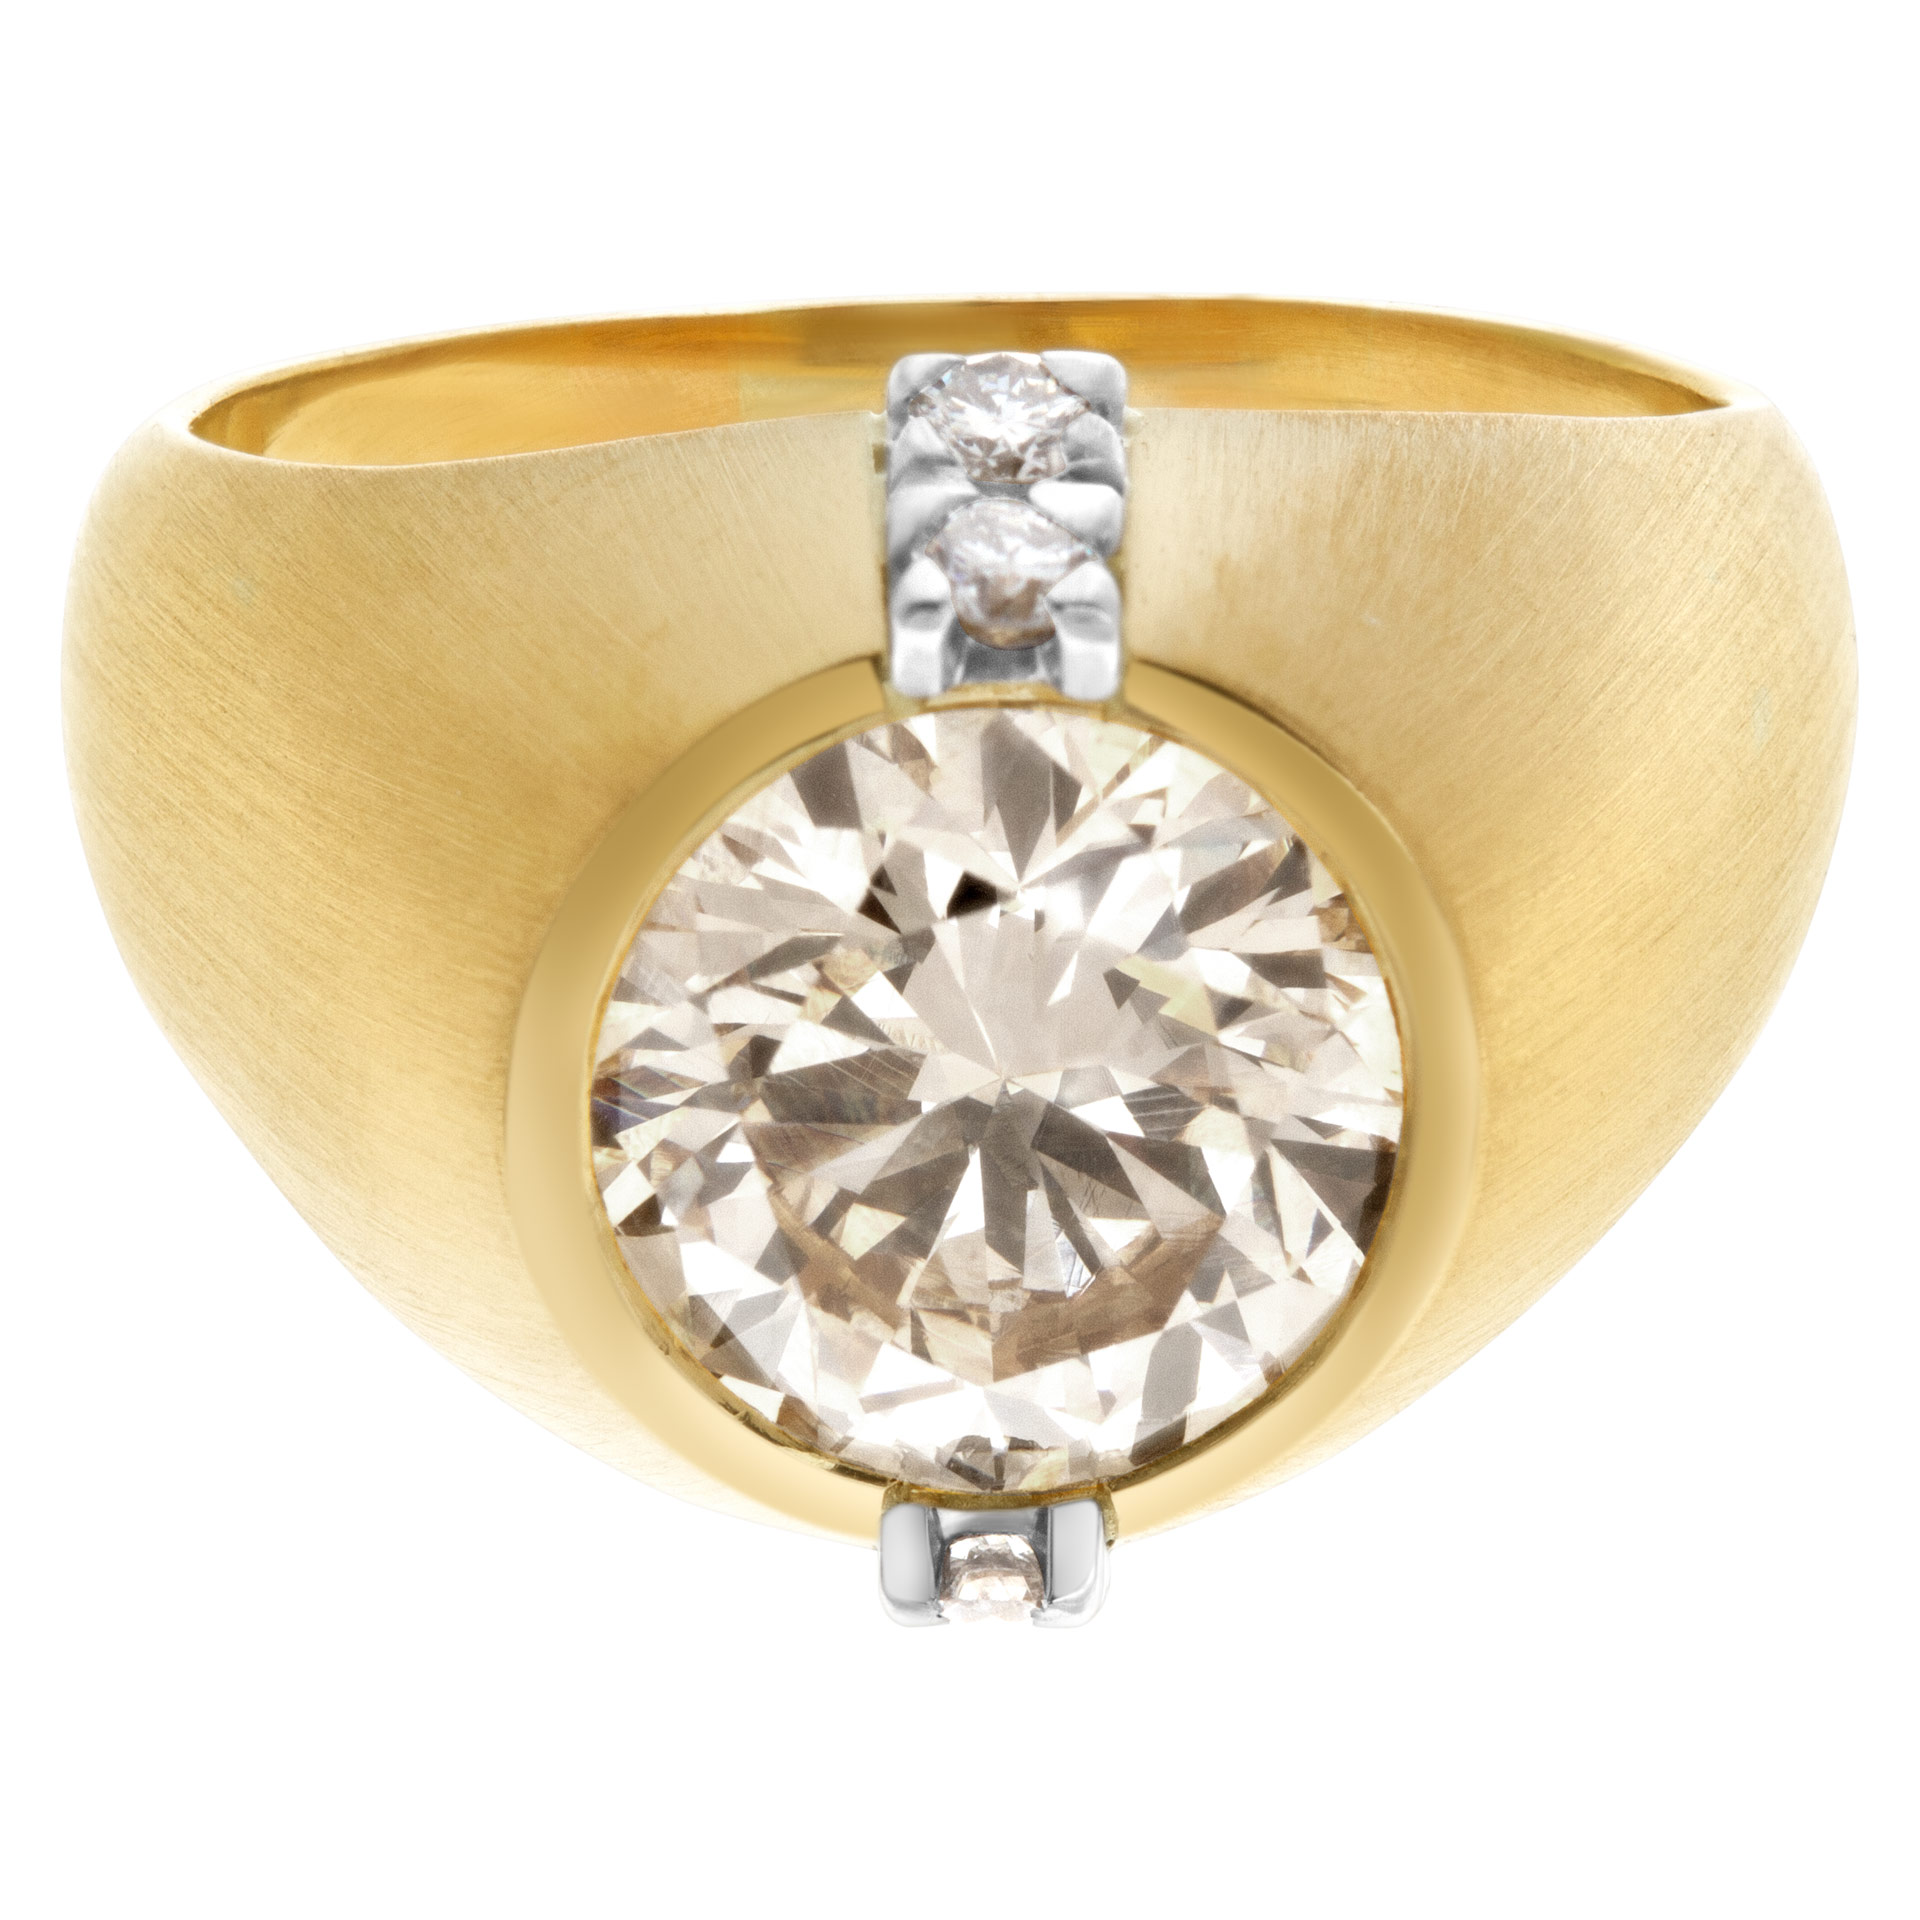 GIA Certified Kutchinsky diamond ring in 18k yellow gold. Warm and bright 4.23 carat center diamond champgane color, VS1 clarity image 4